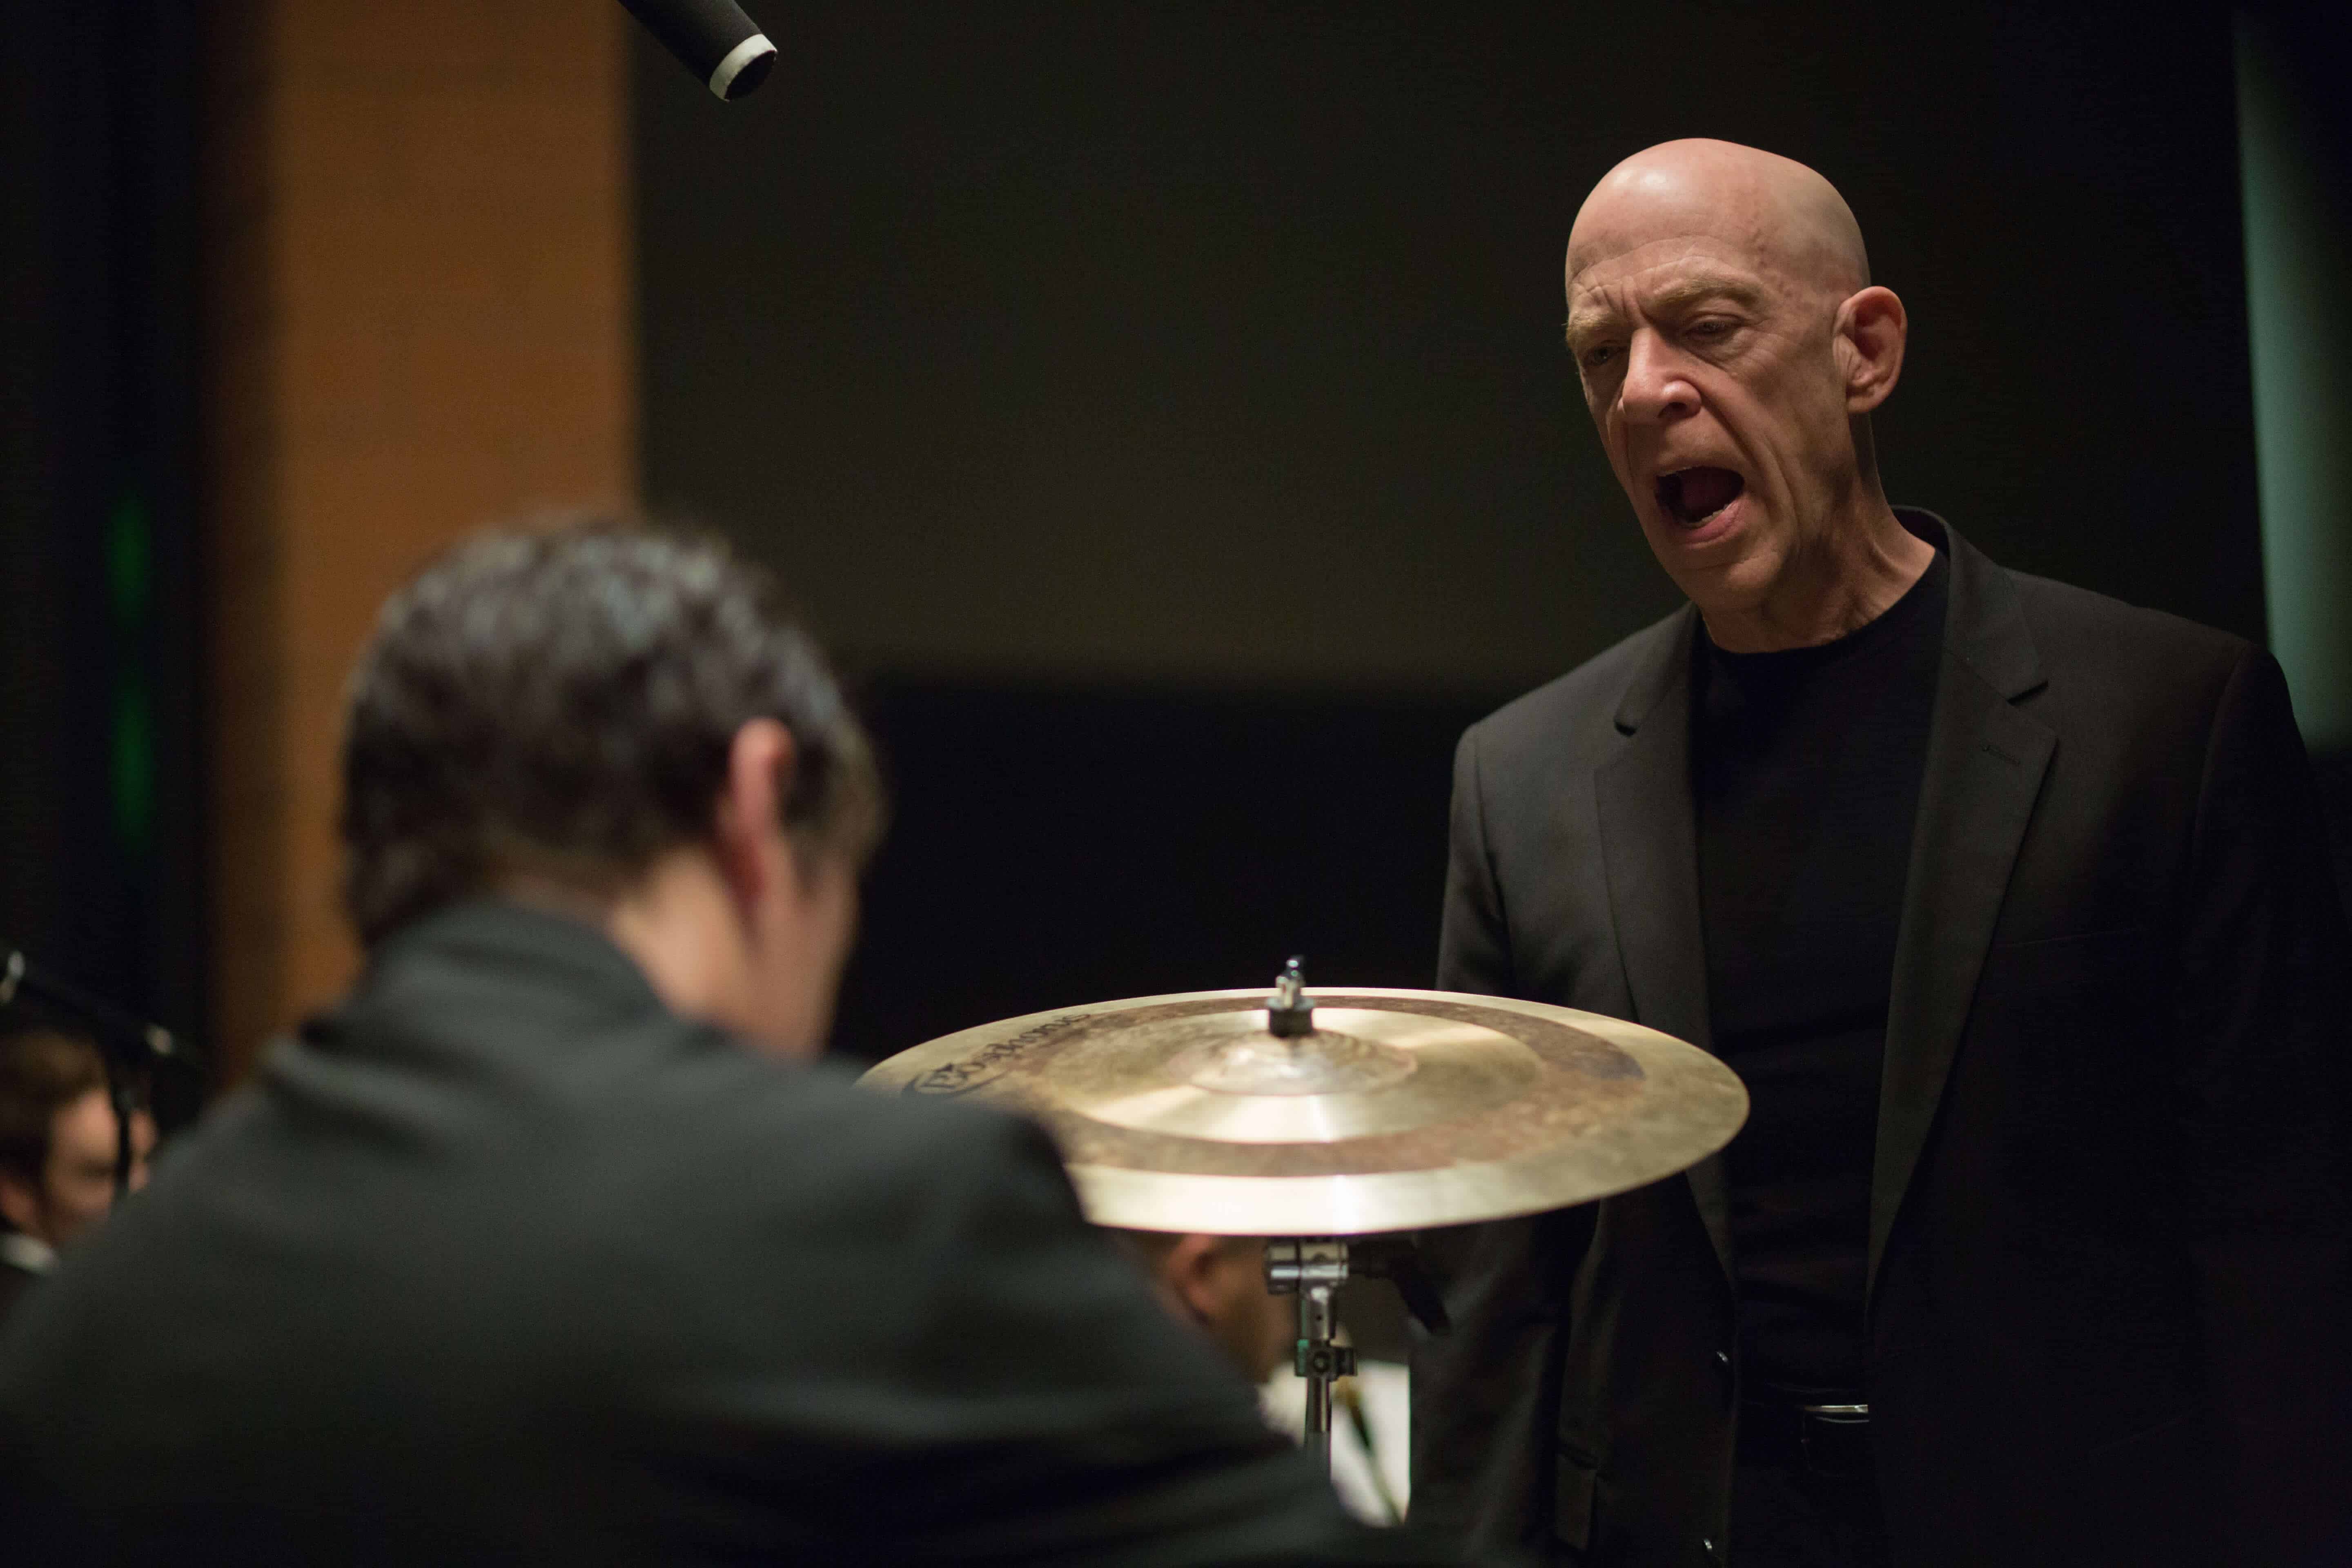 From the movie "Whiplash"